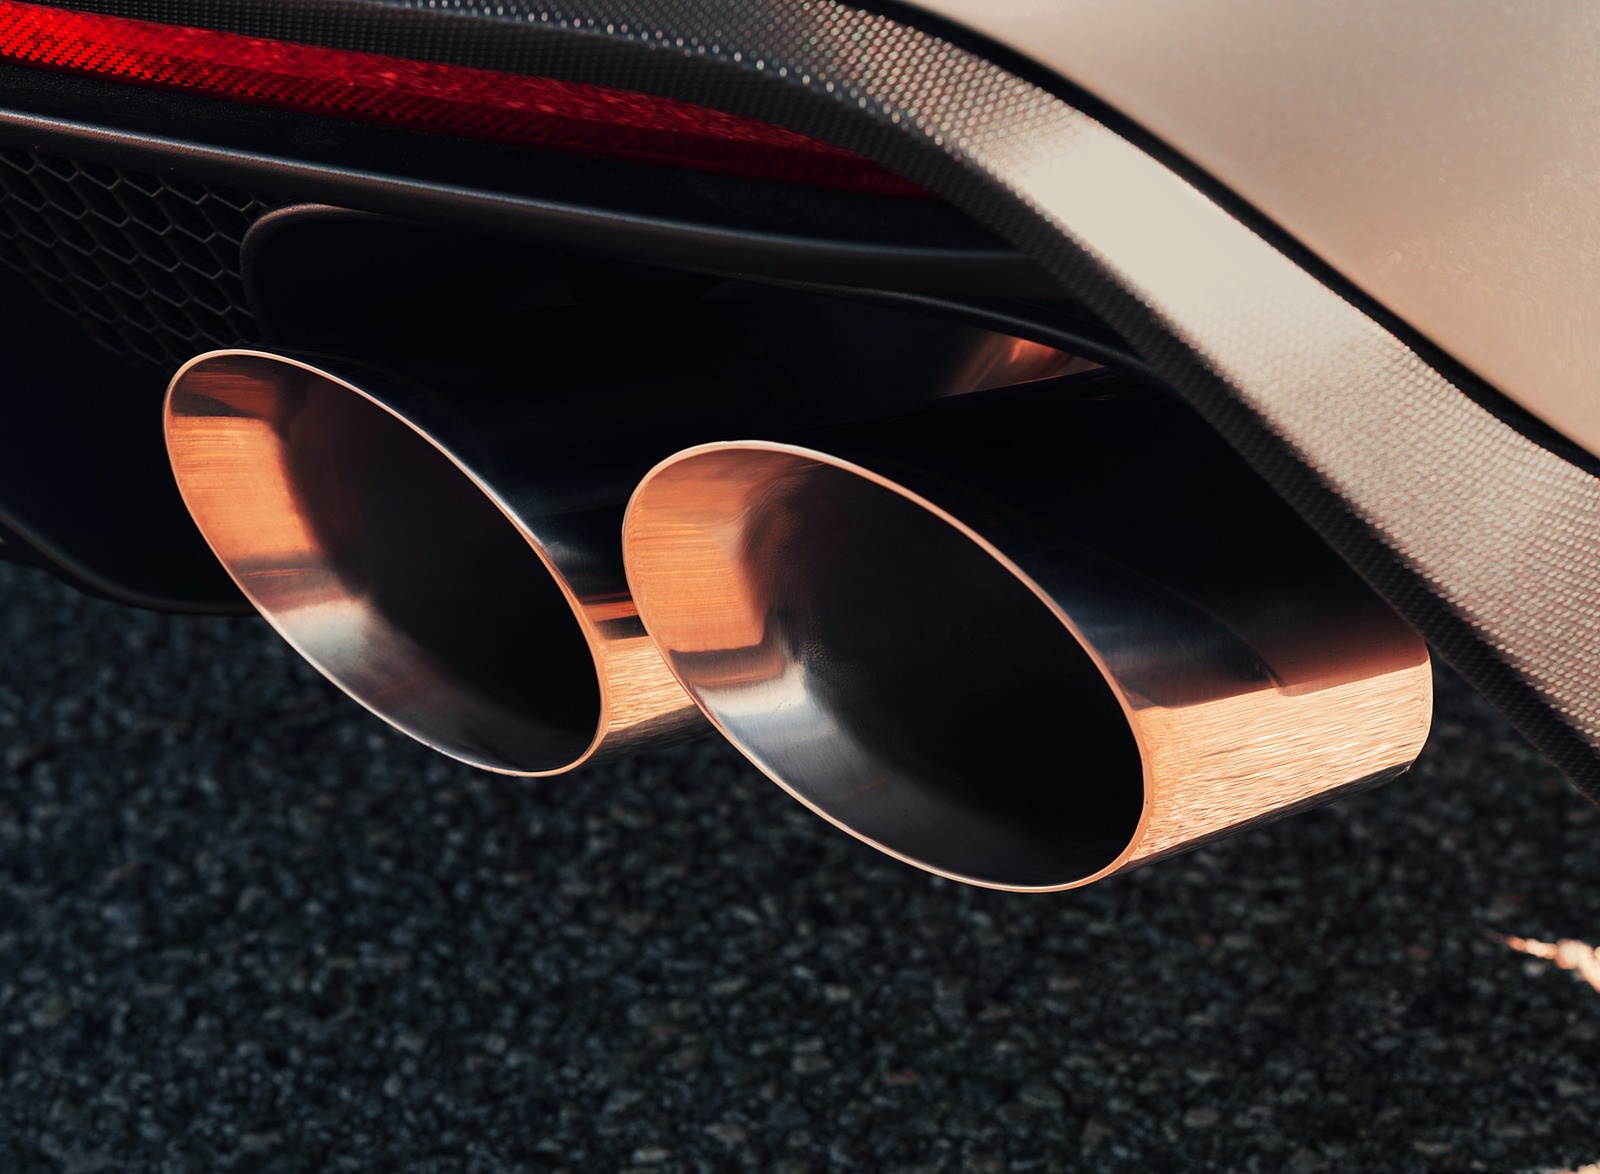 2020 Ford Mustang Shelby GT500 Exhaust Wallpapers #72 of 115